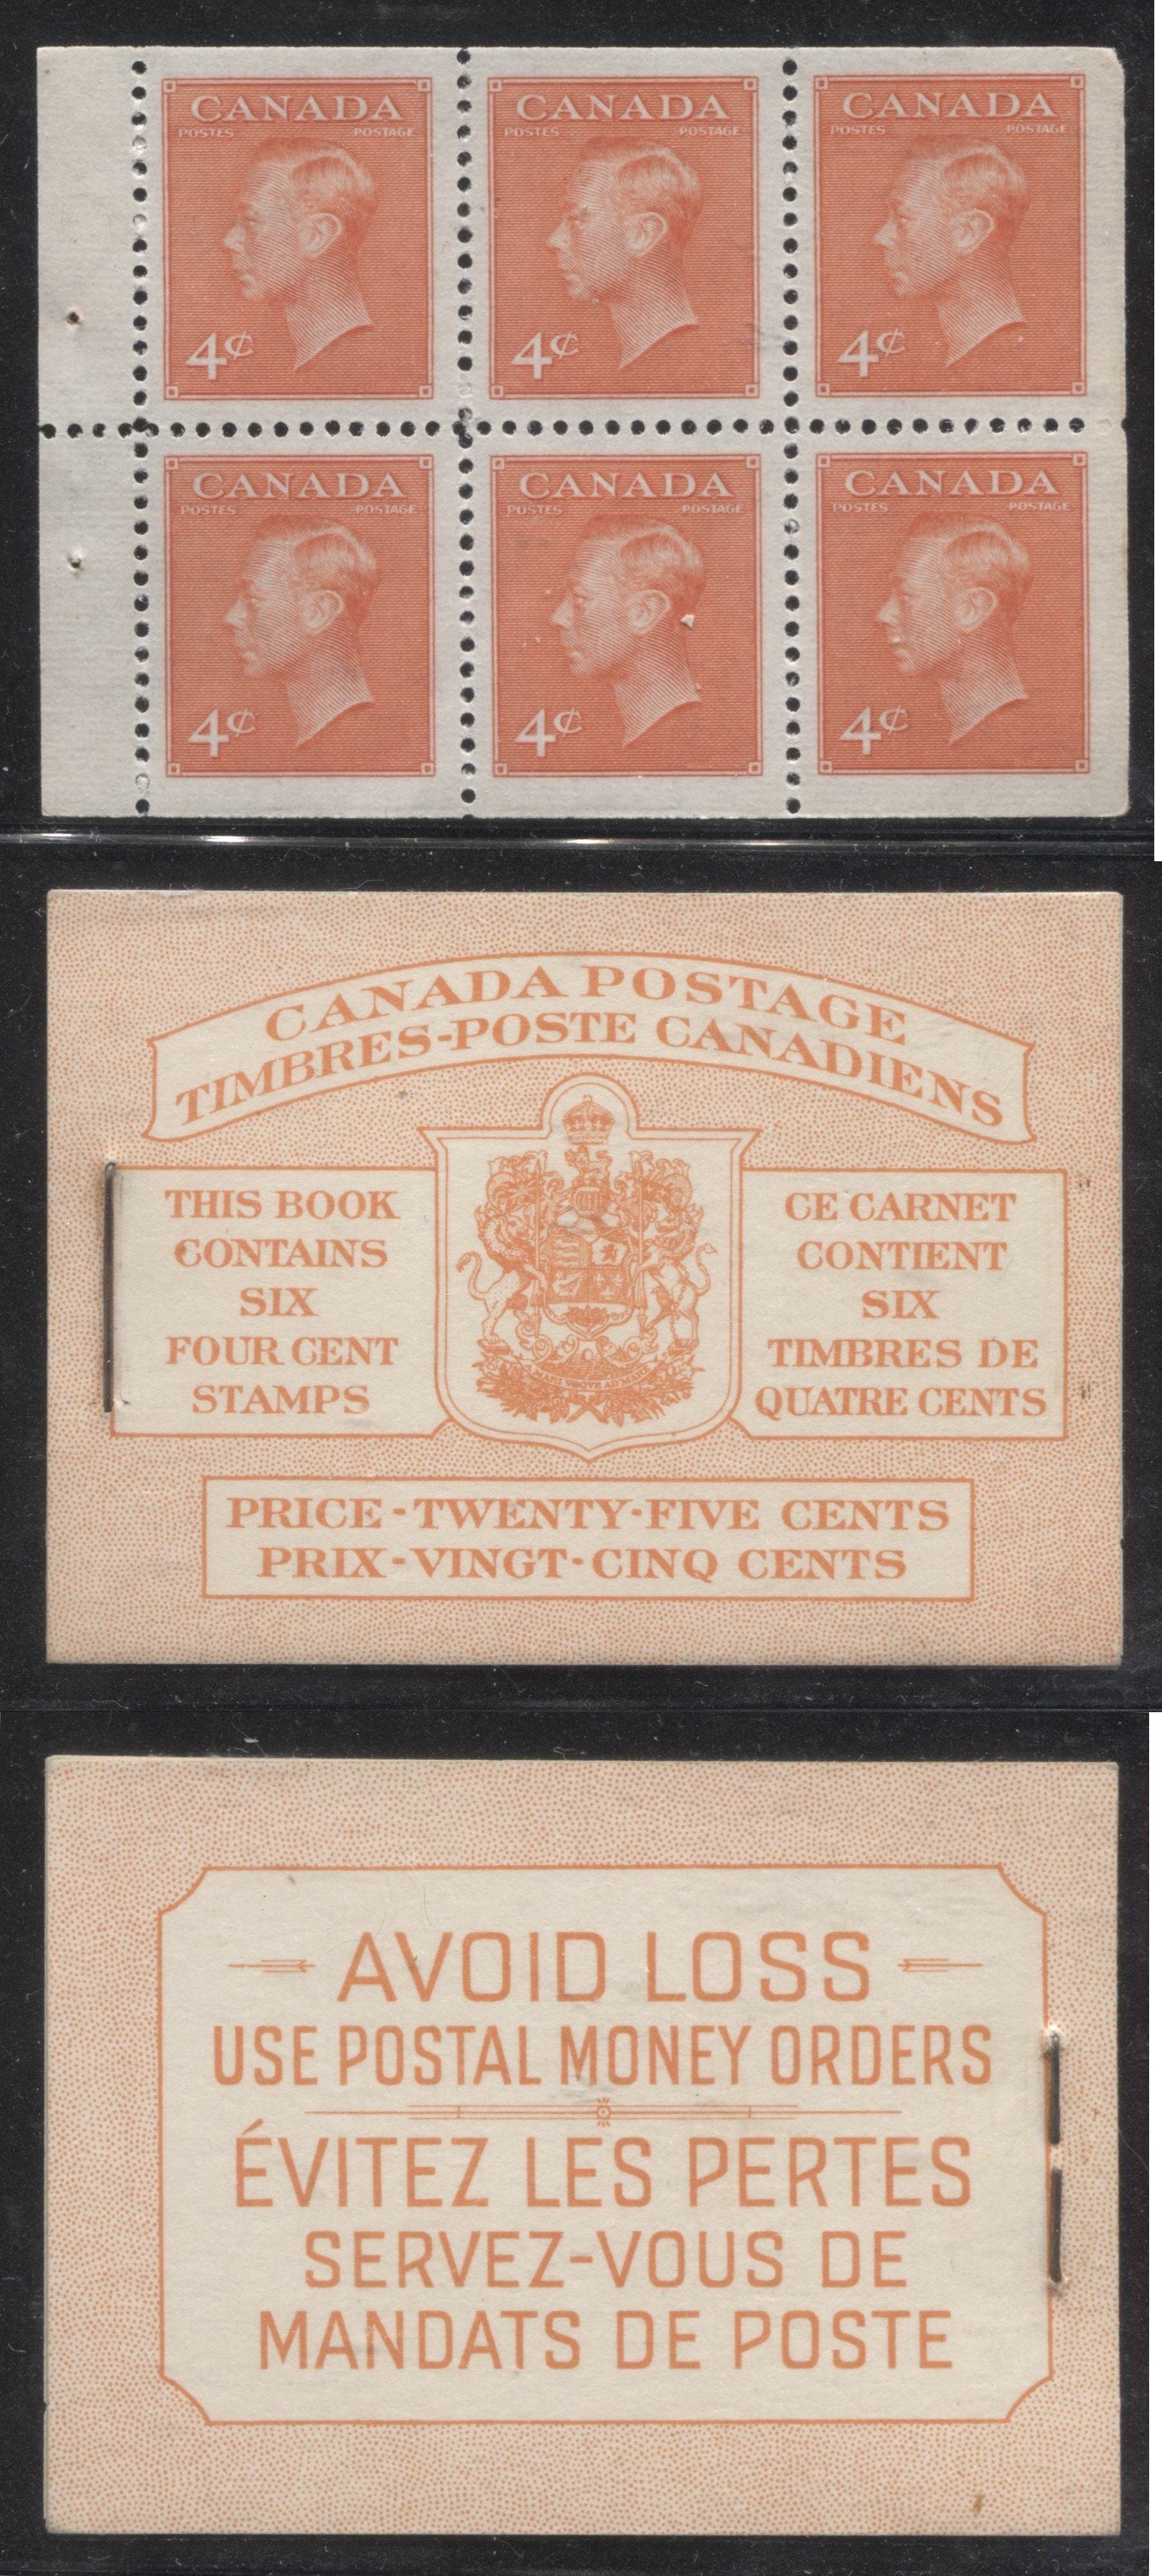 Canada #BK42a 1949-1953 Postes-Postage Issue Complete 25c, Bilingual Booklet Containing 1 Pane of 6 of the 4c Orange King George VI Harris Front Cover Type IIIf , Back Cover Gii, No Rate Page Brixton Chrome 